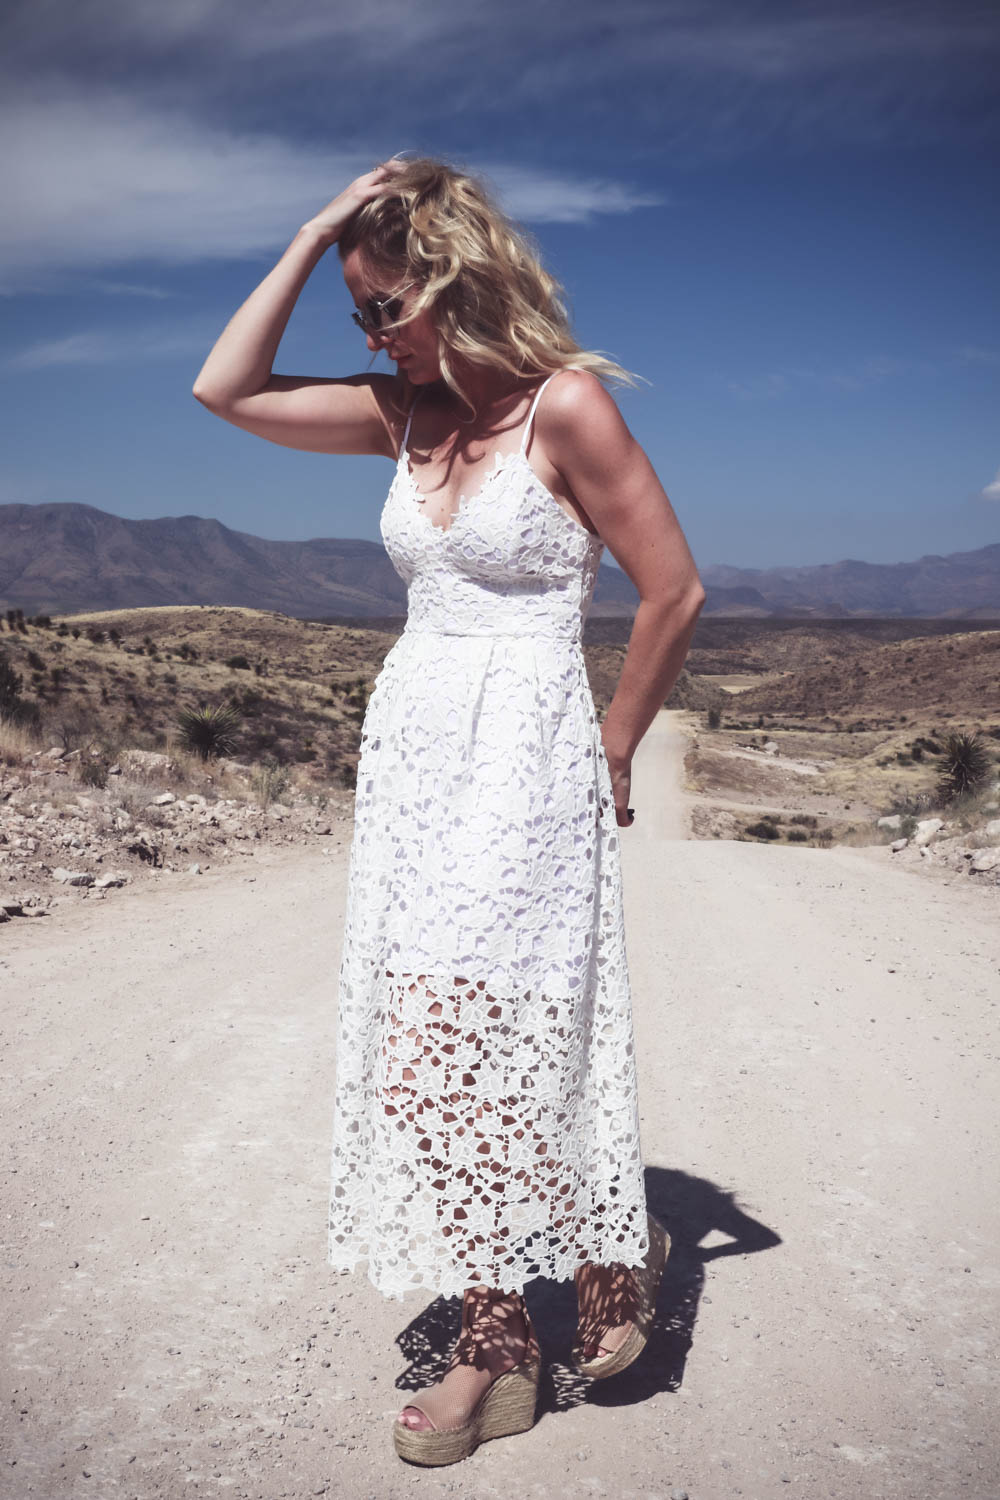 Fashion blogger and fashion youtuber, erin busbee of busbeestyle.com, wearing a white lace dress by ASTR, nude leather espadrille sandals by Marc Fisher (super comfortable) and the mirrored aviator sunglasses are by Quay Australia at Cibolo Creek Ranch in West Texas near Marfa